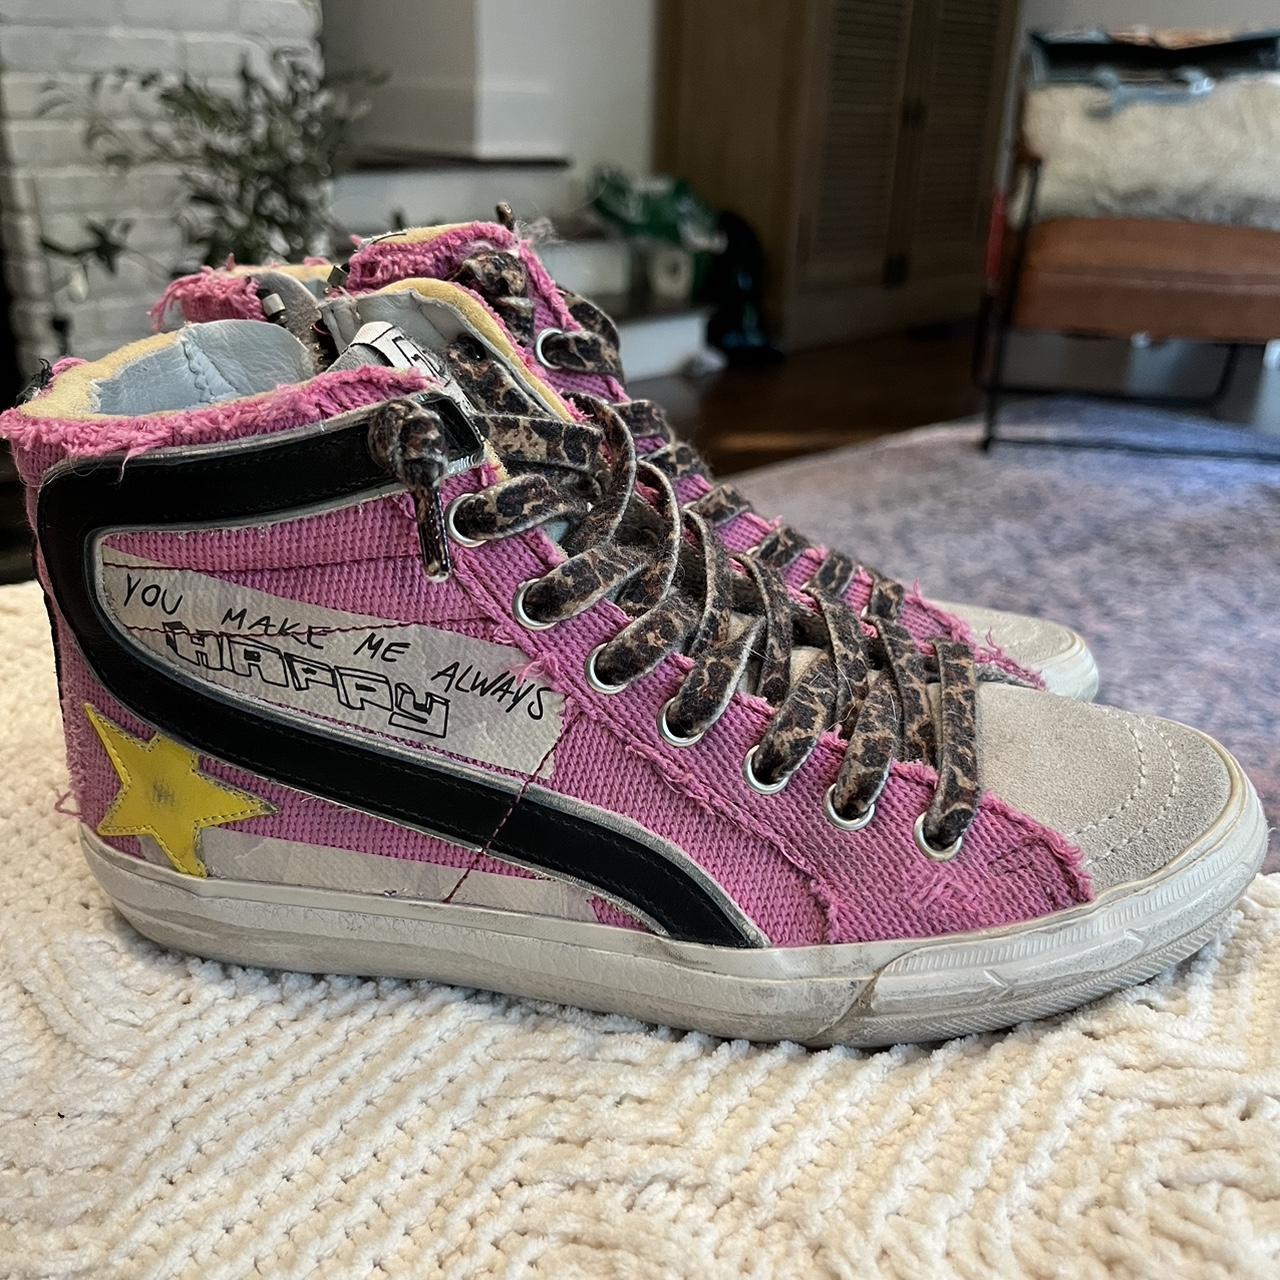 Golden Goose Women's Pink and Black Trainers